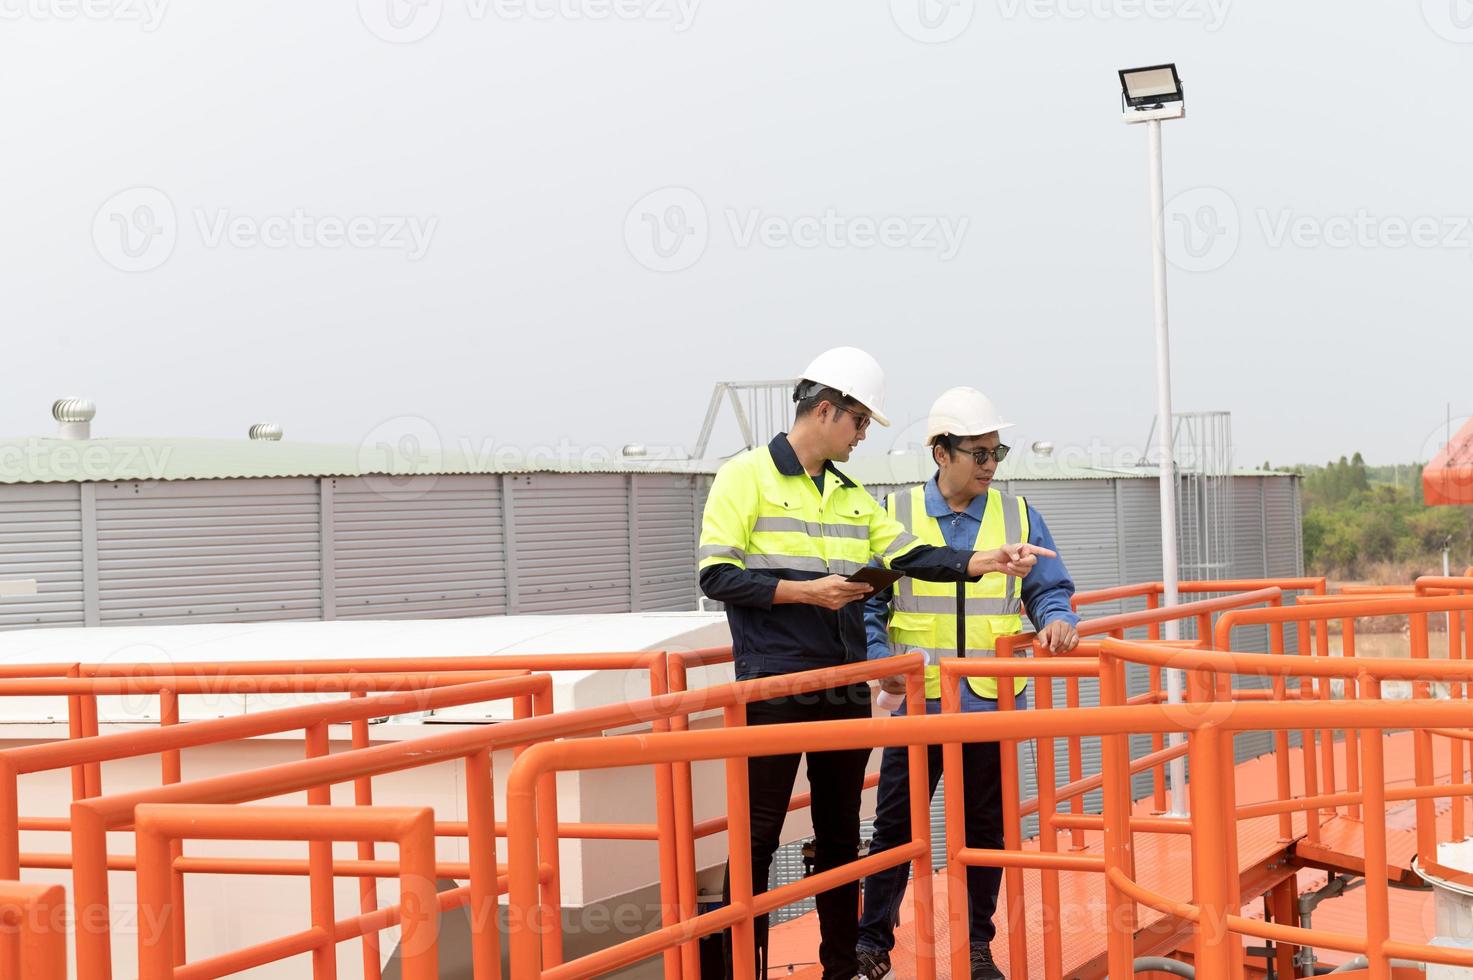 Two heavy industrial engineers standing in a standard water treatment plant use digital tablet computers and chatting. Asian industry professionals photo